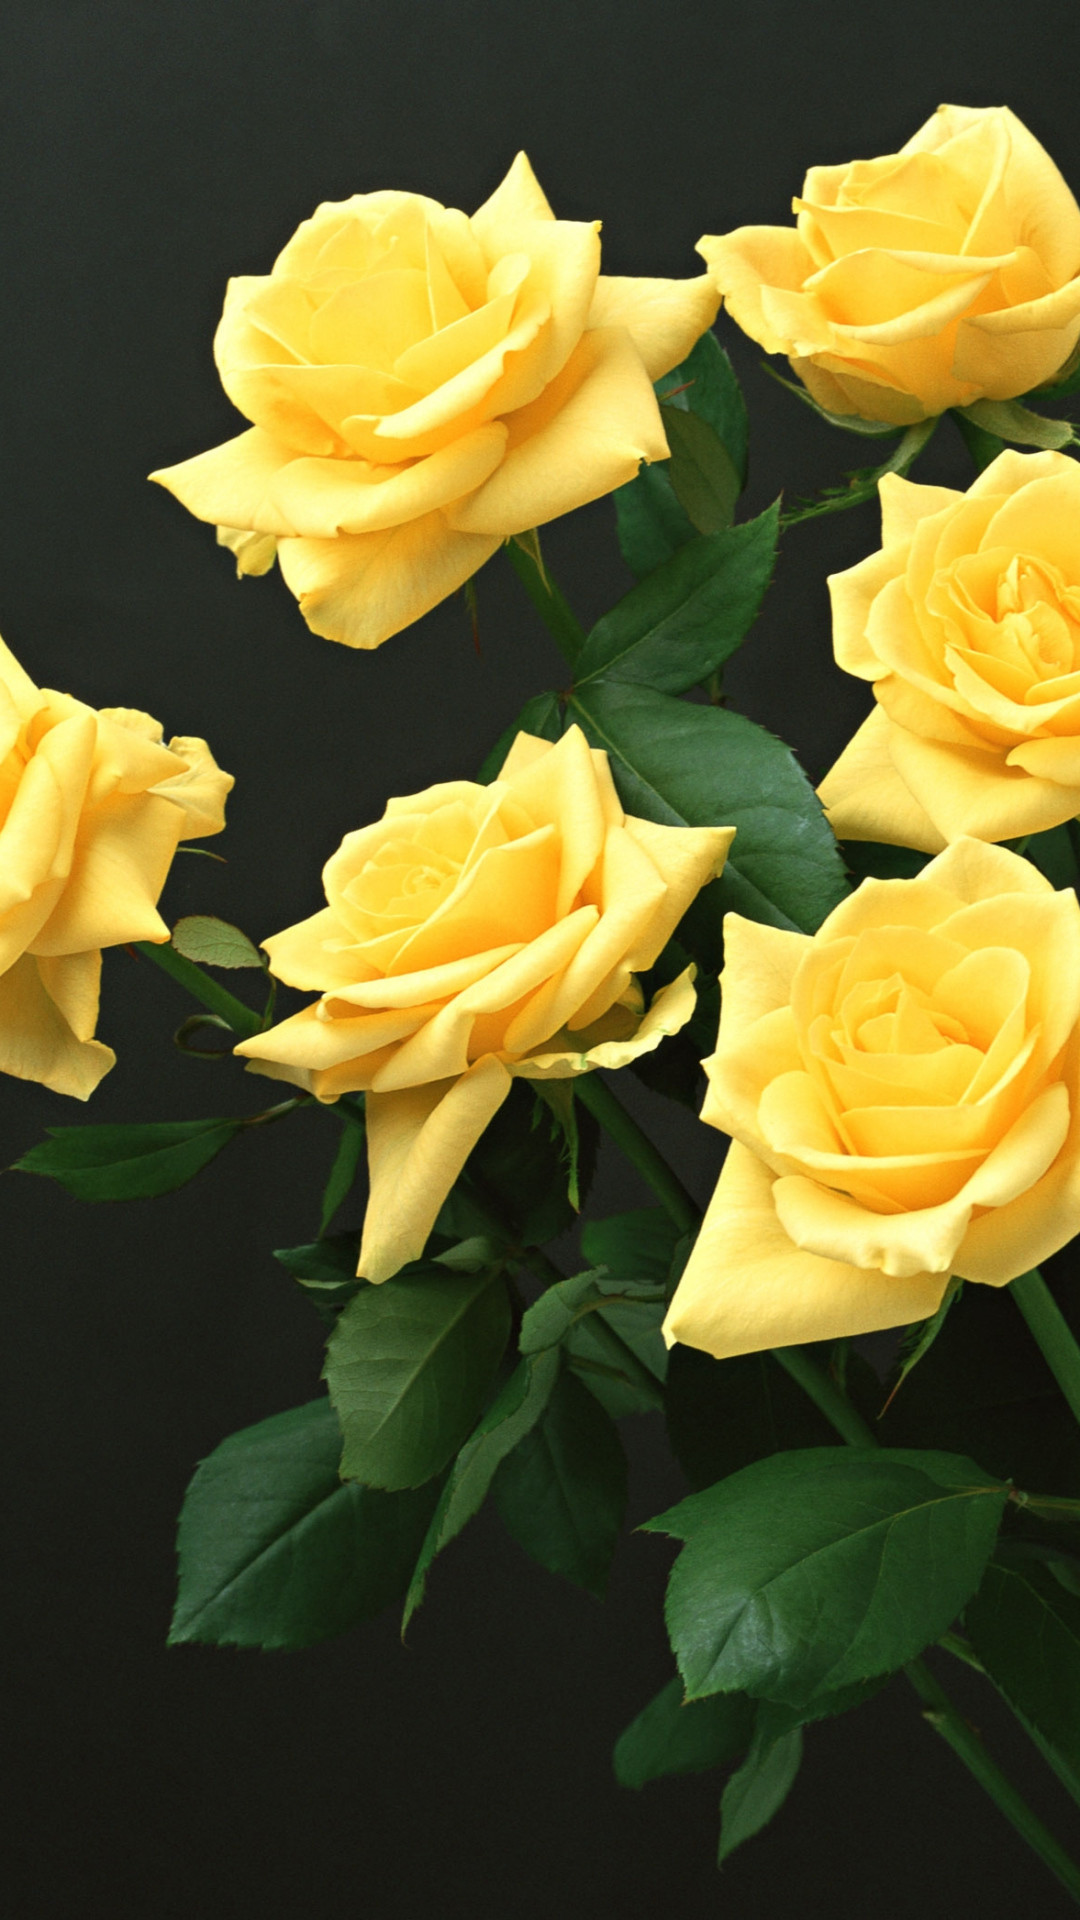 1080x1920  Wallpaper yellow, roses, black background, flowers